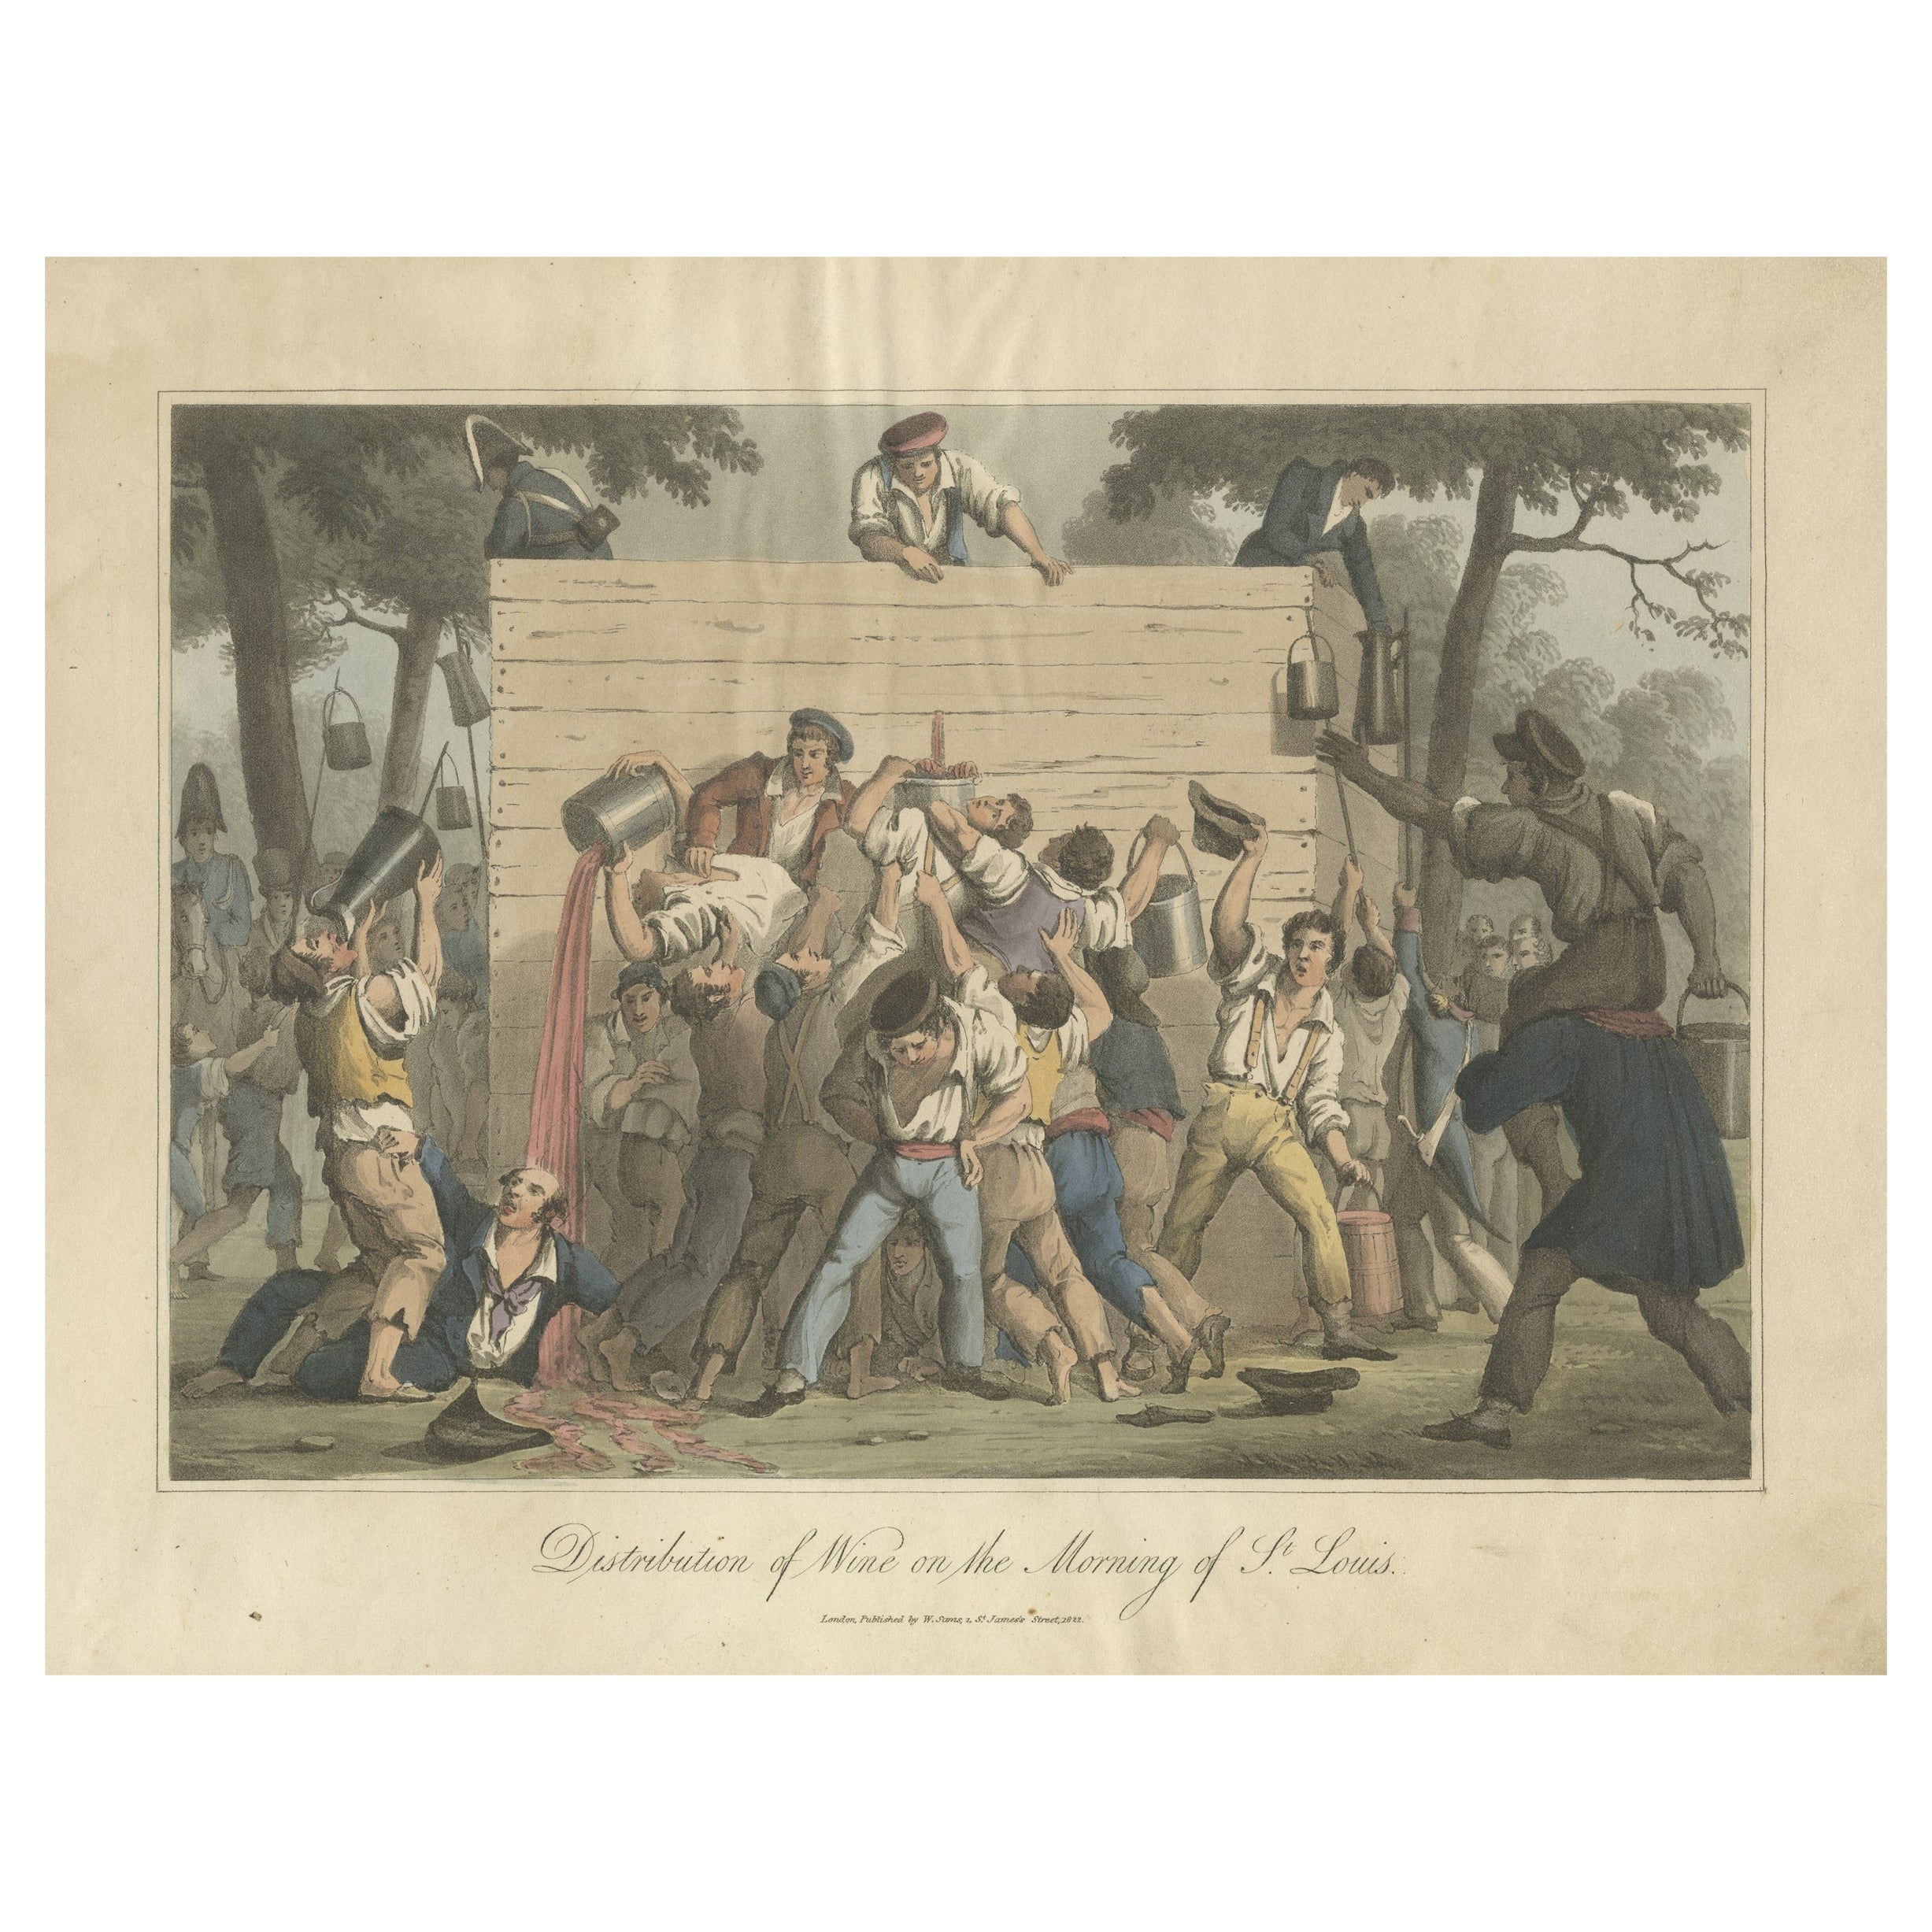 Antique Aquatint of The Distribution of Wine on the Morning of St.Louis, c.1822